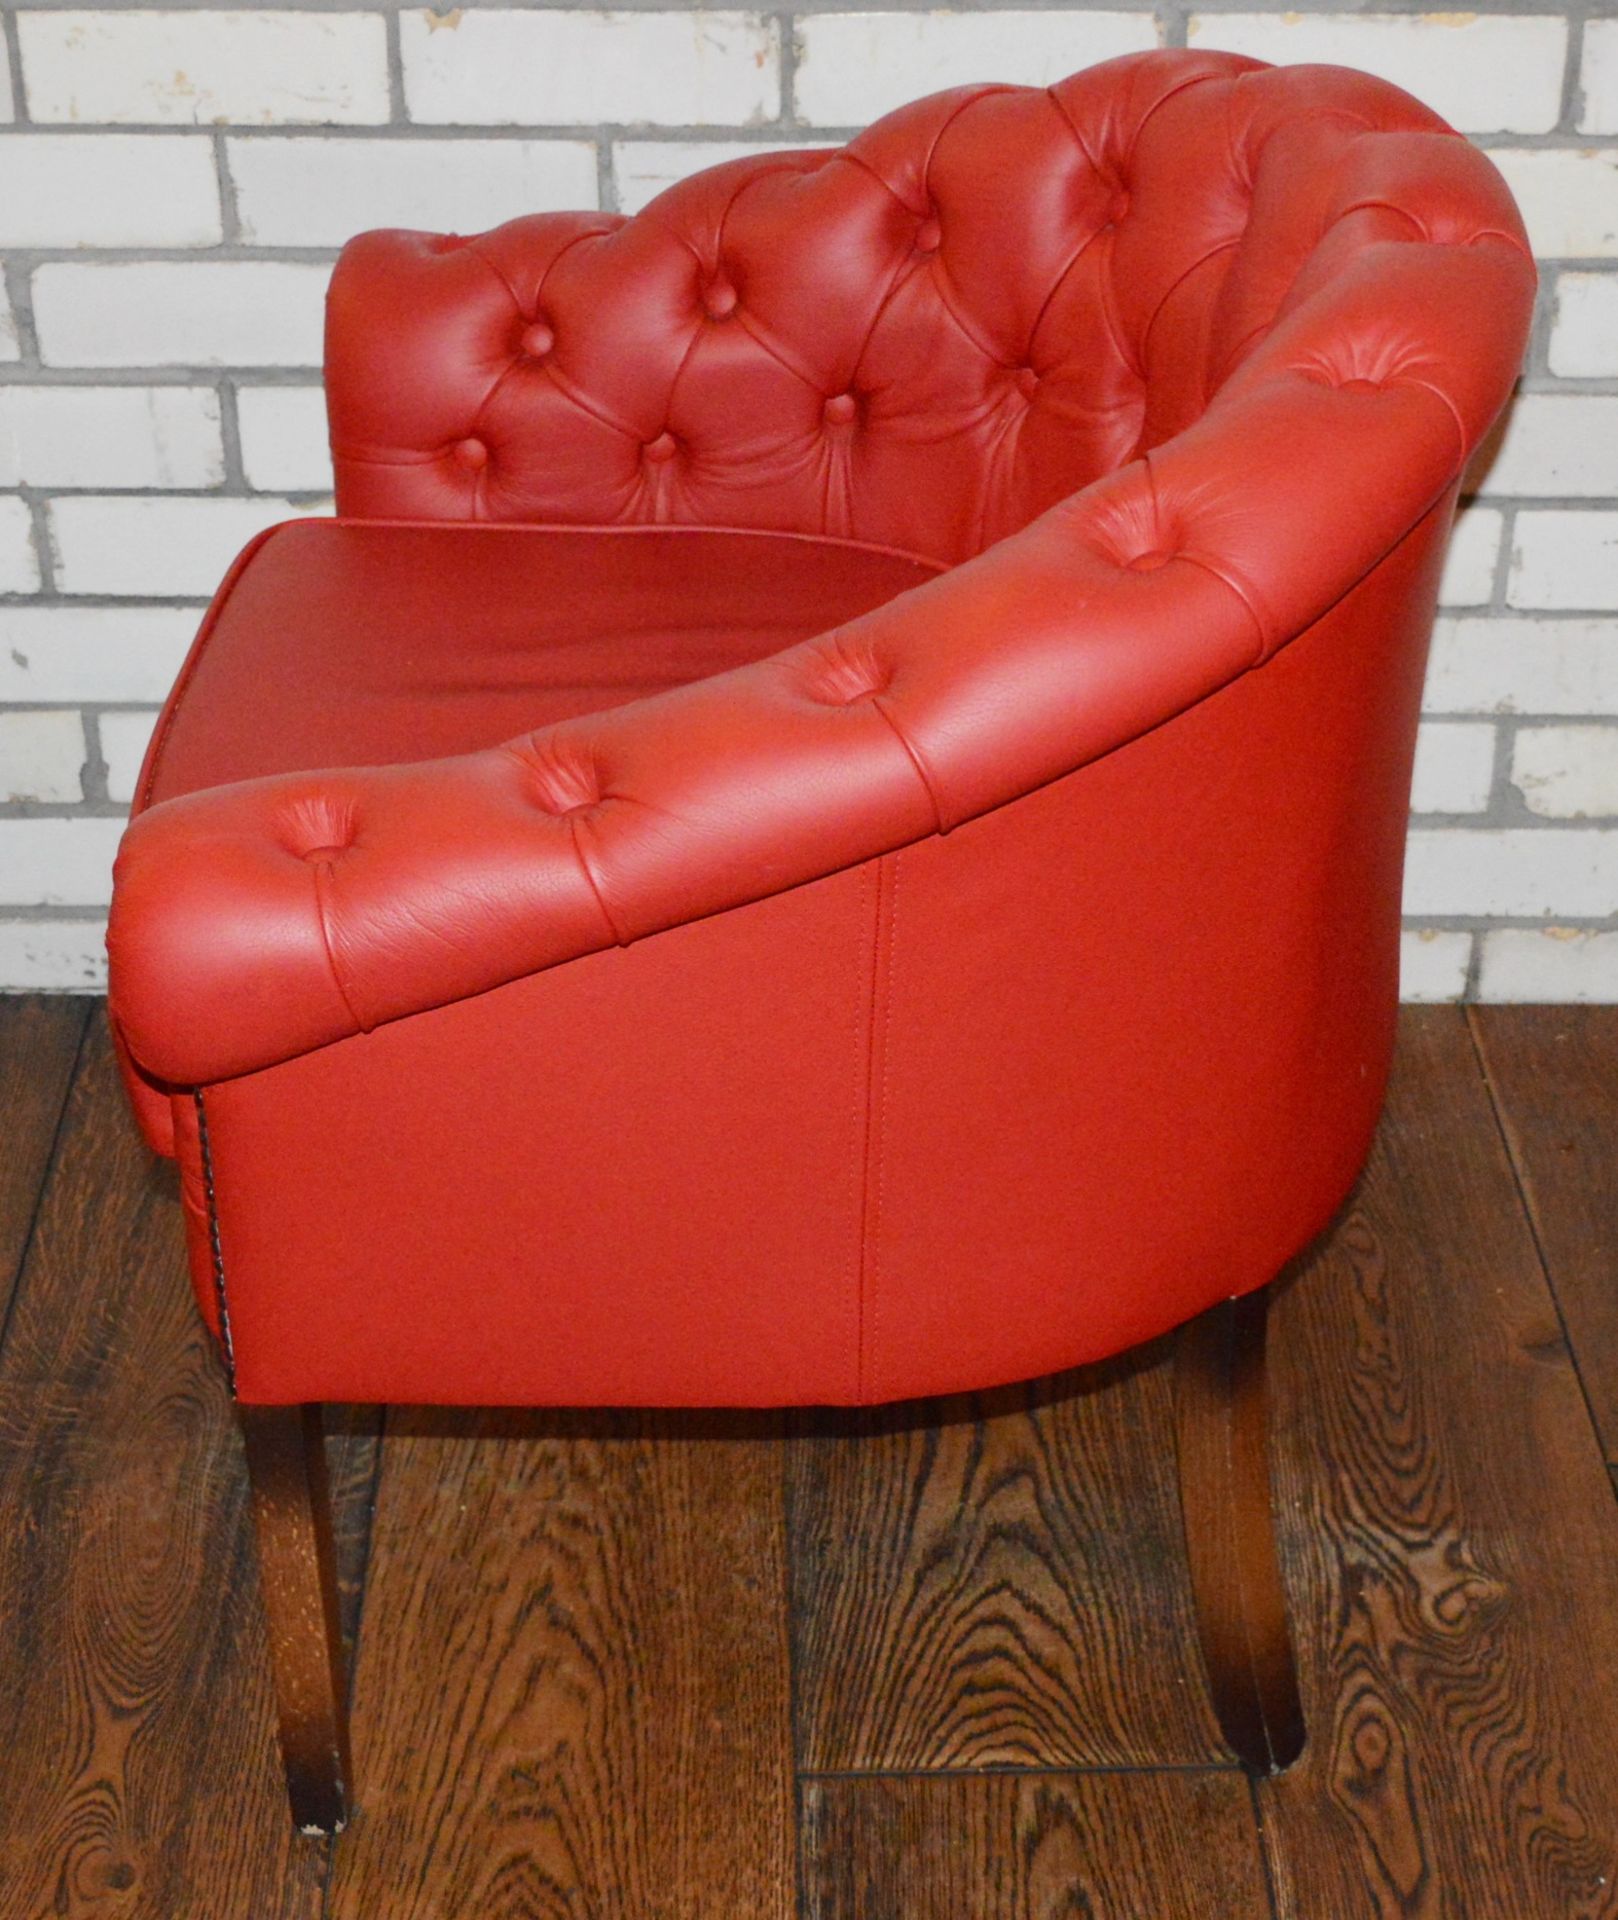 2 x Chesterfield Style Buttoned Back Red Leather Tub Chairs With Hardwood Legs Finished in an - Image 3 of 8